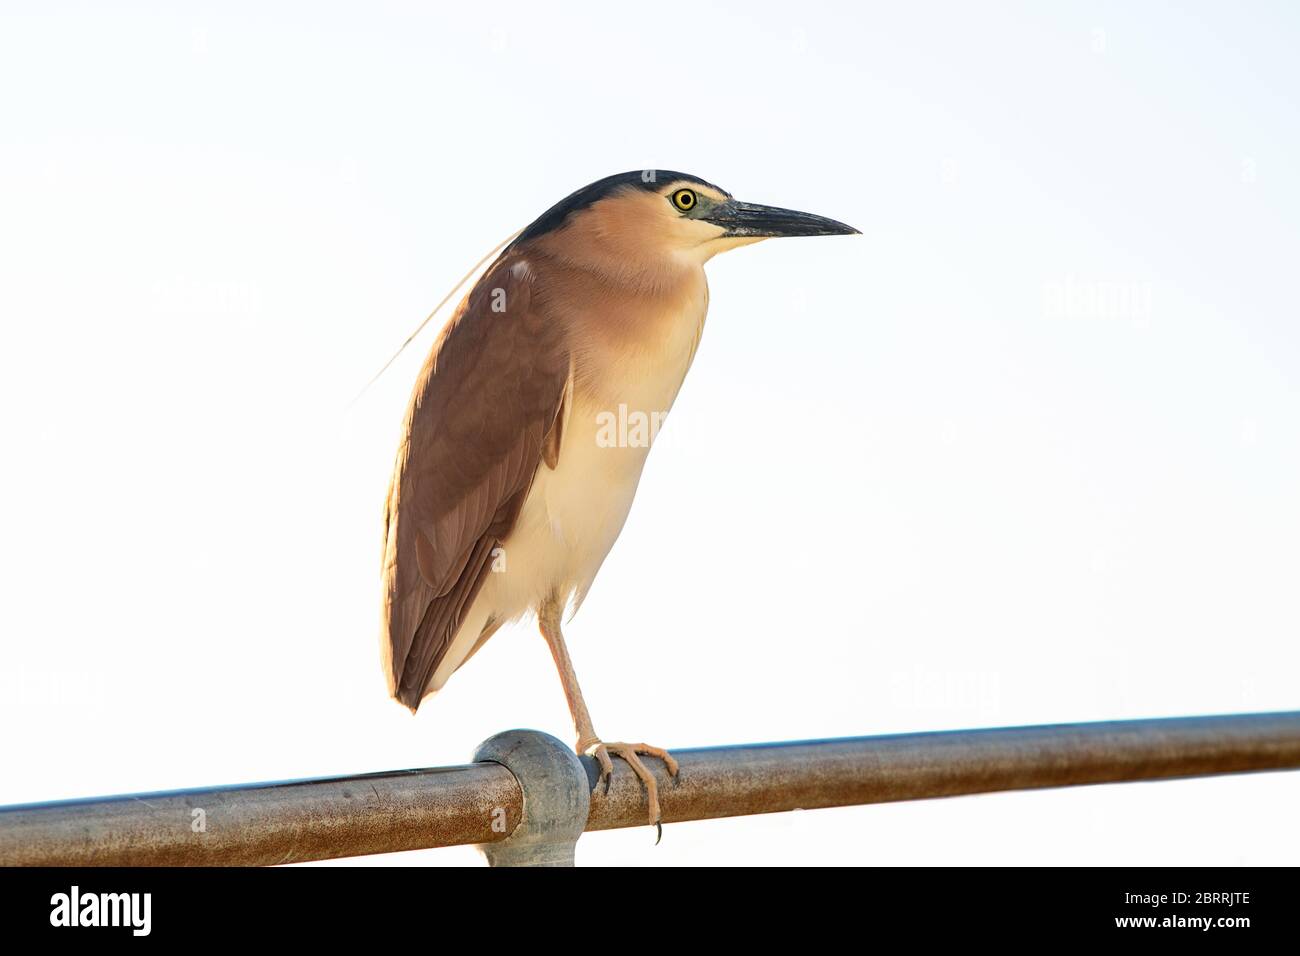 Nankeen night heron on a metal rail isolated against white background Stock Photo